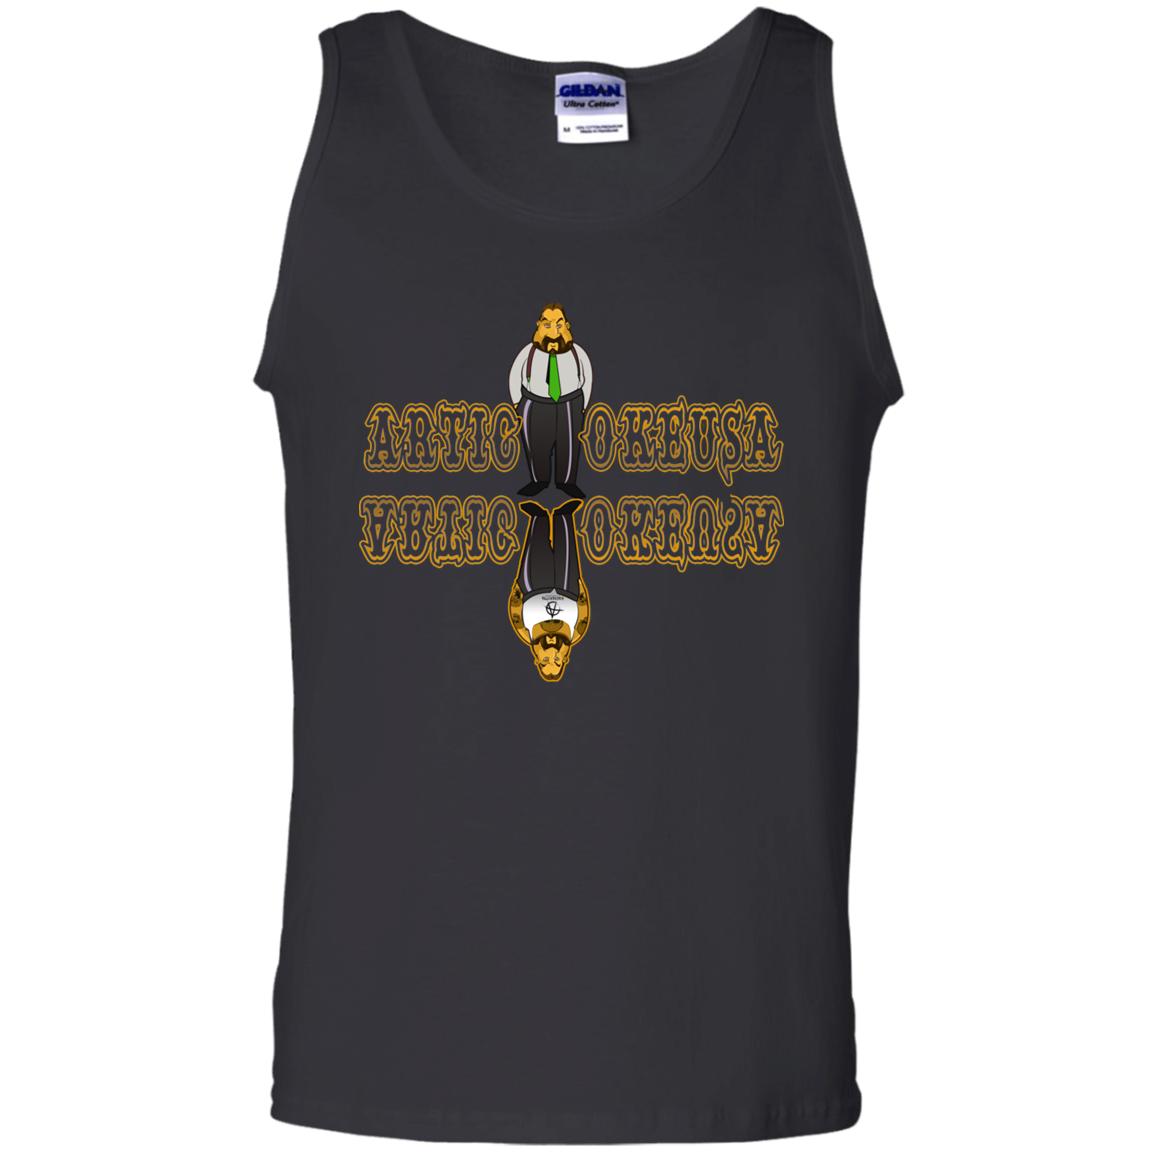 ArtichokeUSA Custom Design. Façade: (Noun) A false appearance that makes someone or something seem more pleasant or better than they really are.  Men's 100% Cotton Tank Top